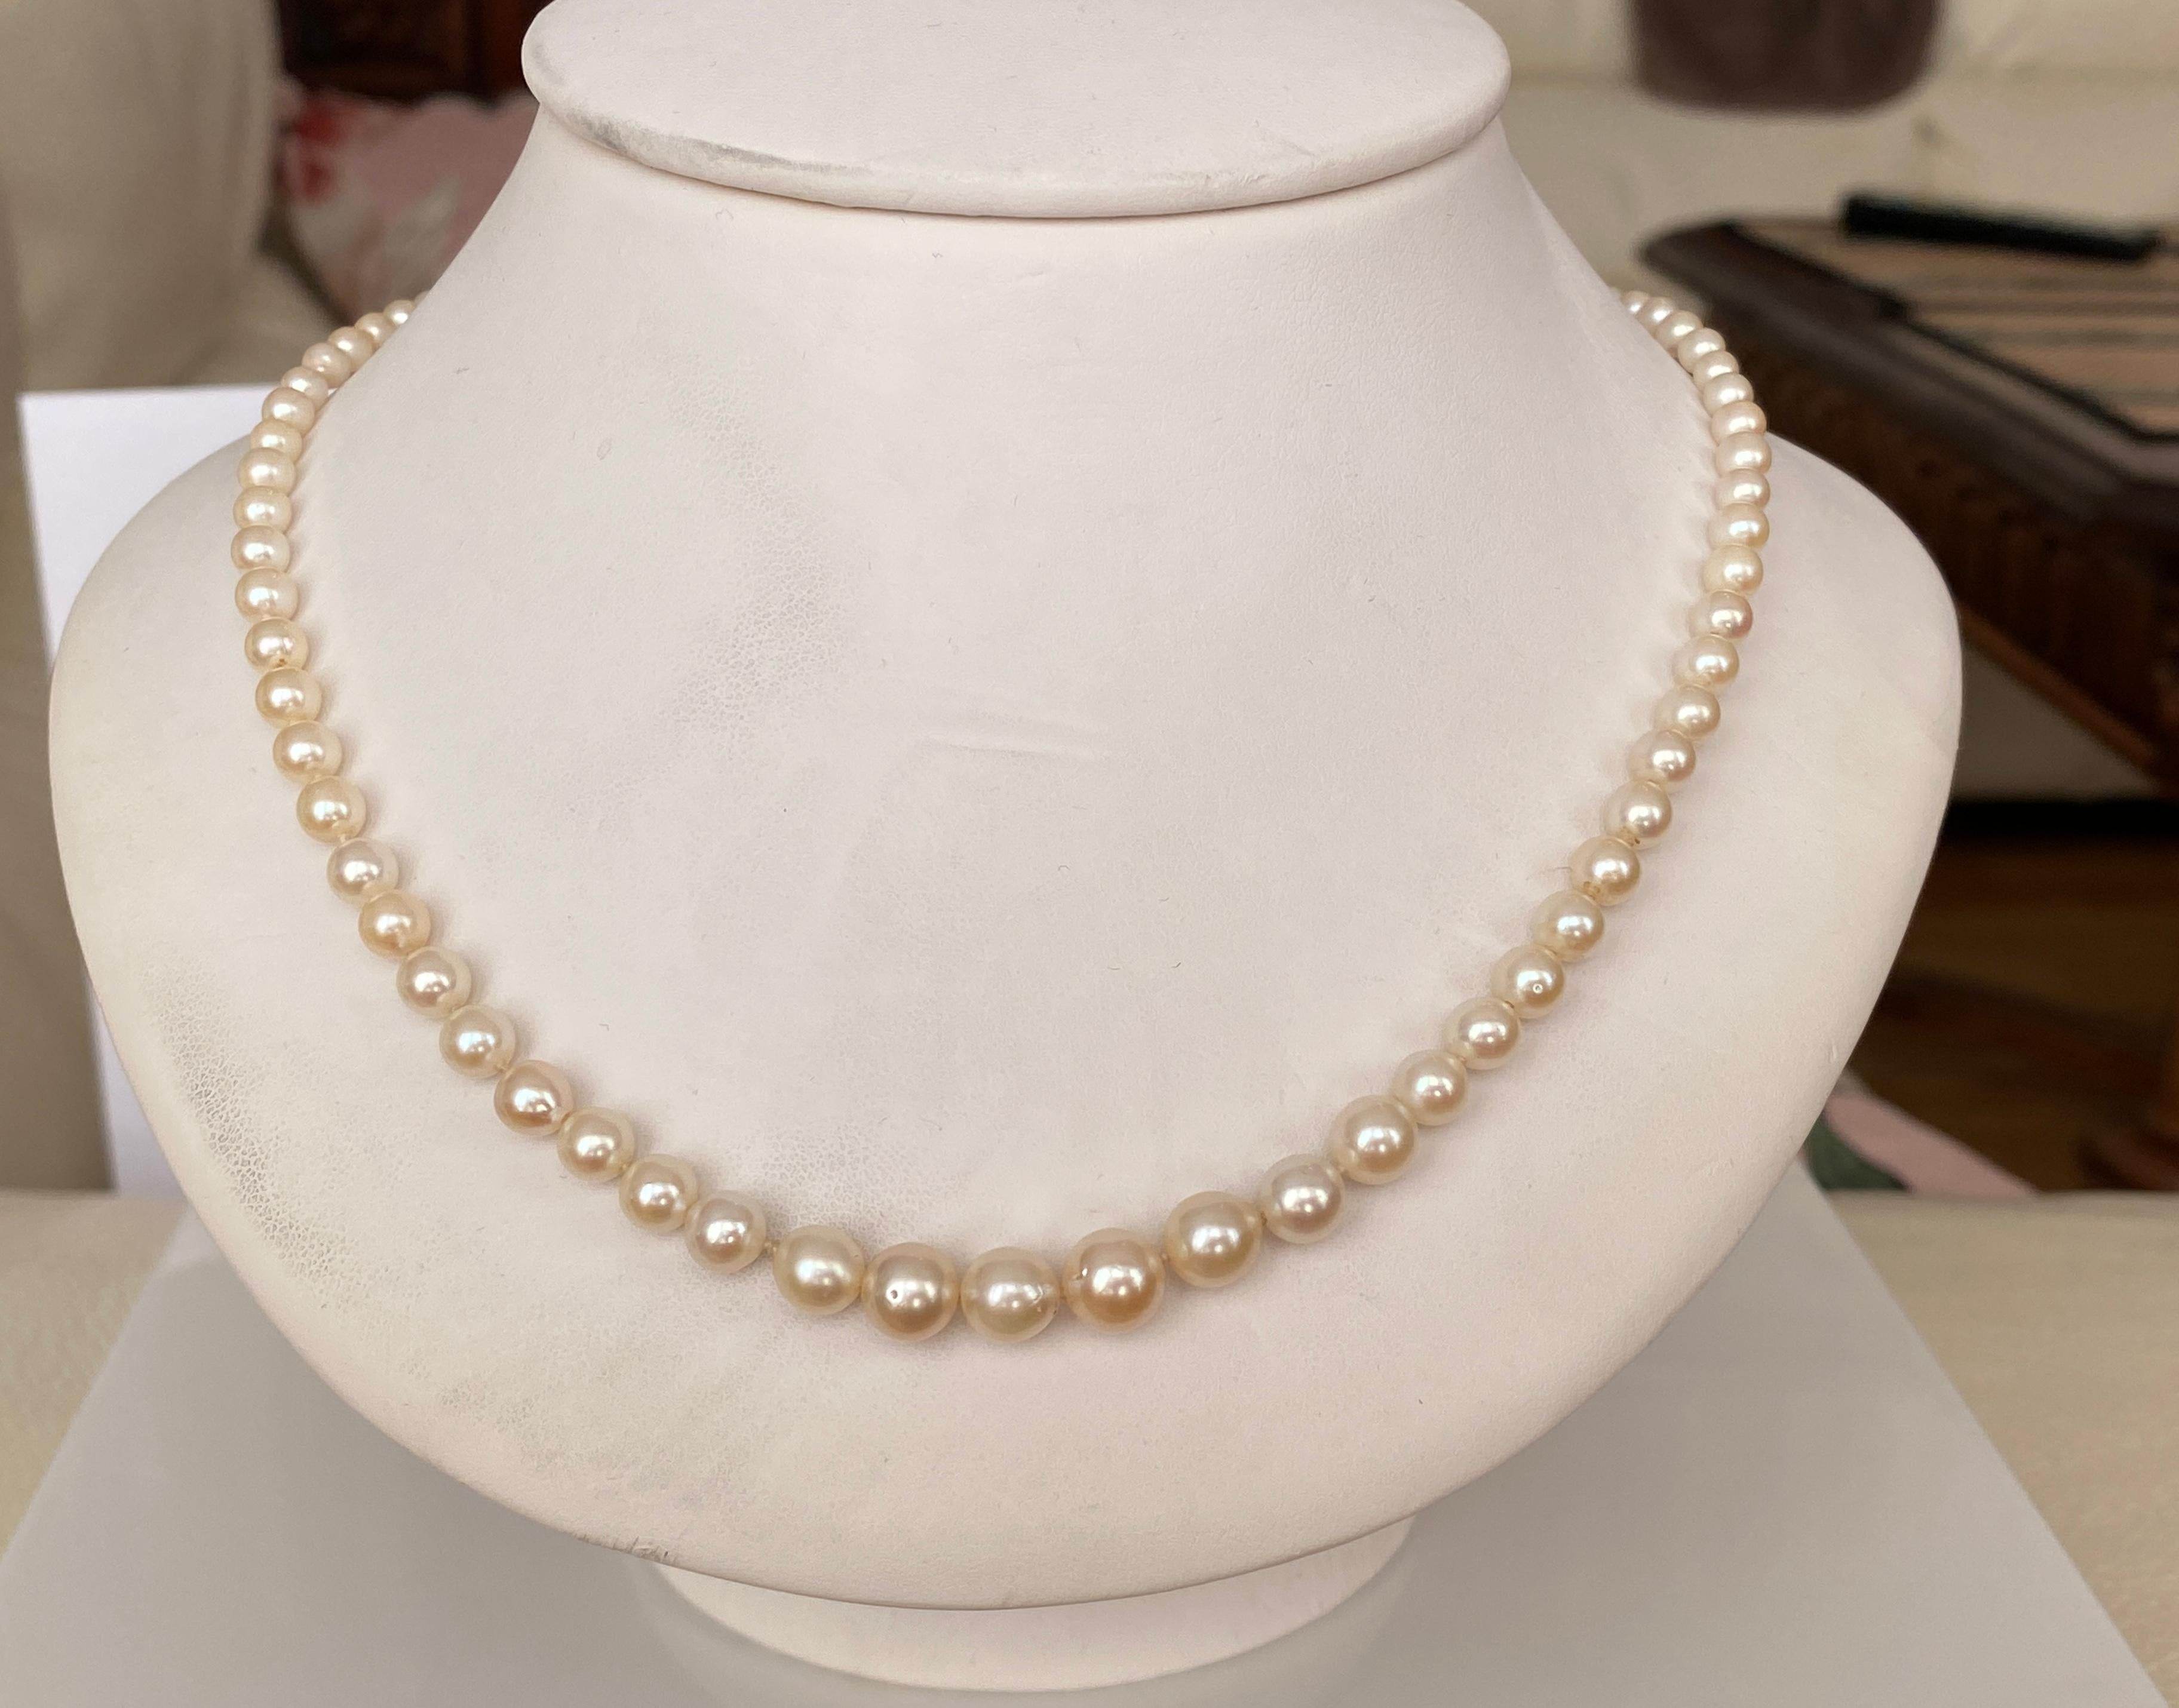 93 gleaming and luminous cultured Akoya pearls form this magnificent Art Deco-era necklace. The opera-length -20 inch- necklace is completed by a 18k yellow gold clasp set with old-cut diamonds  and onyx.  The pearls range in size from 3.21mm to